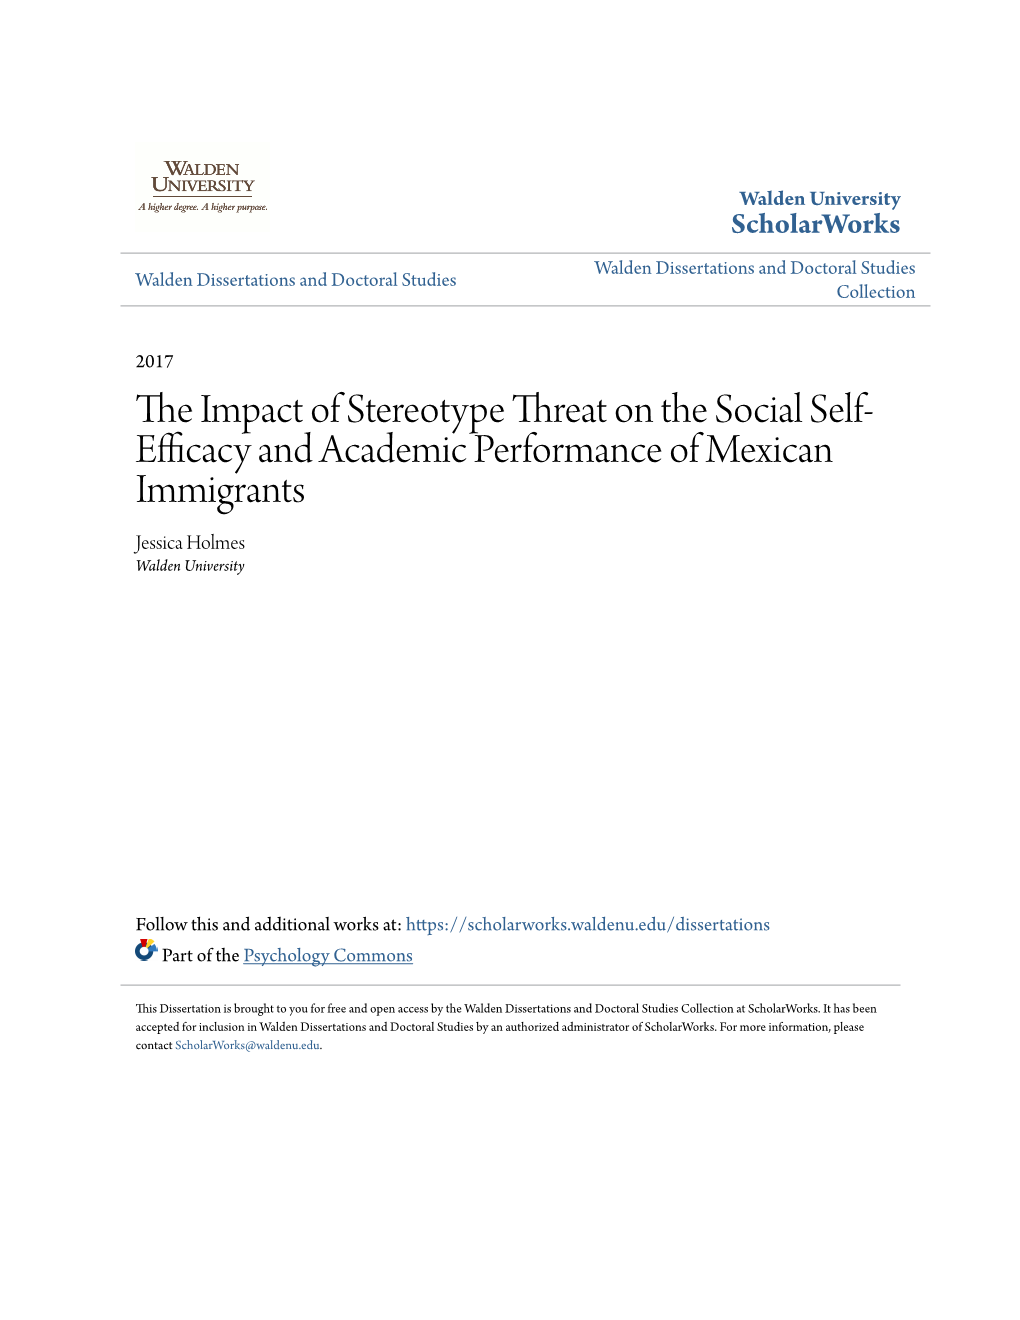 The Impact of Stereotype Threat on the Social Self-Efficacy and Academic Performance